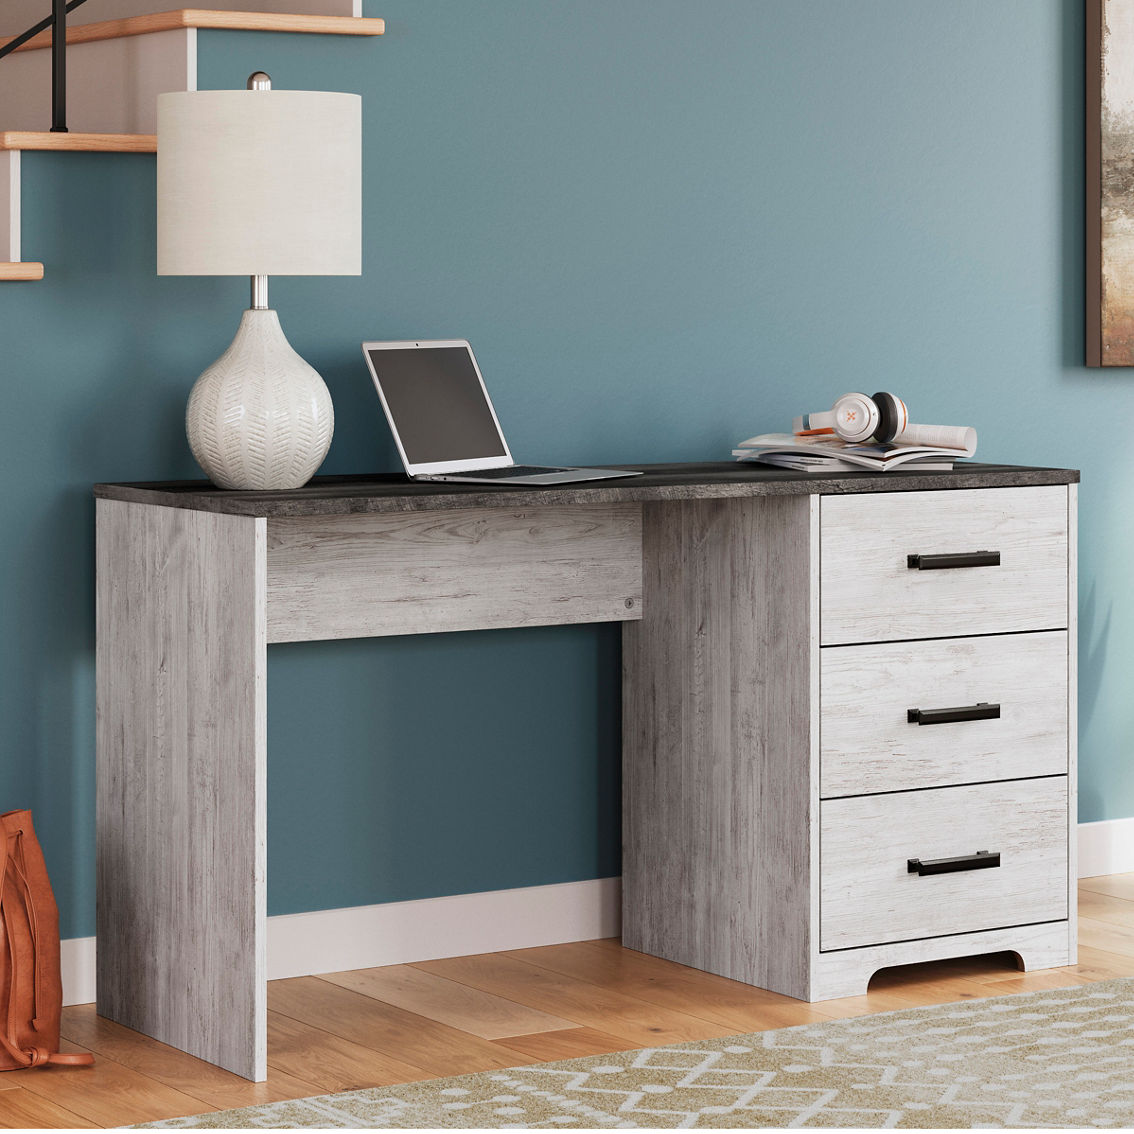 Signature Design by Ashley Shawburn 54 in. Home Office Desk - Image 6 of 7